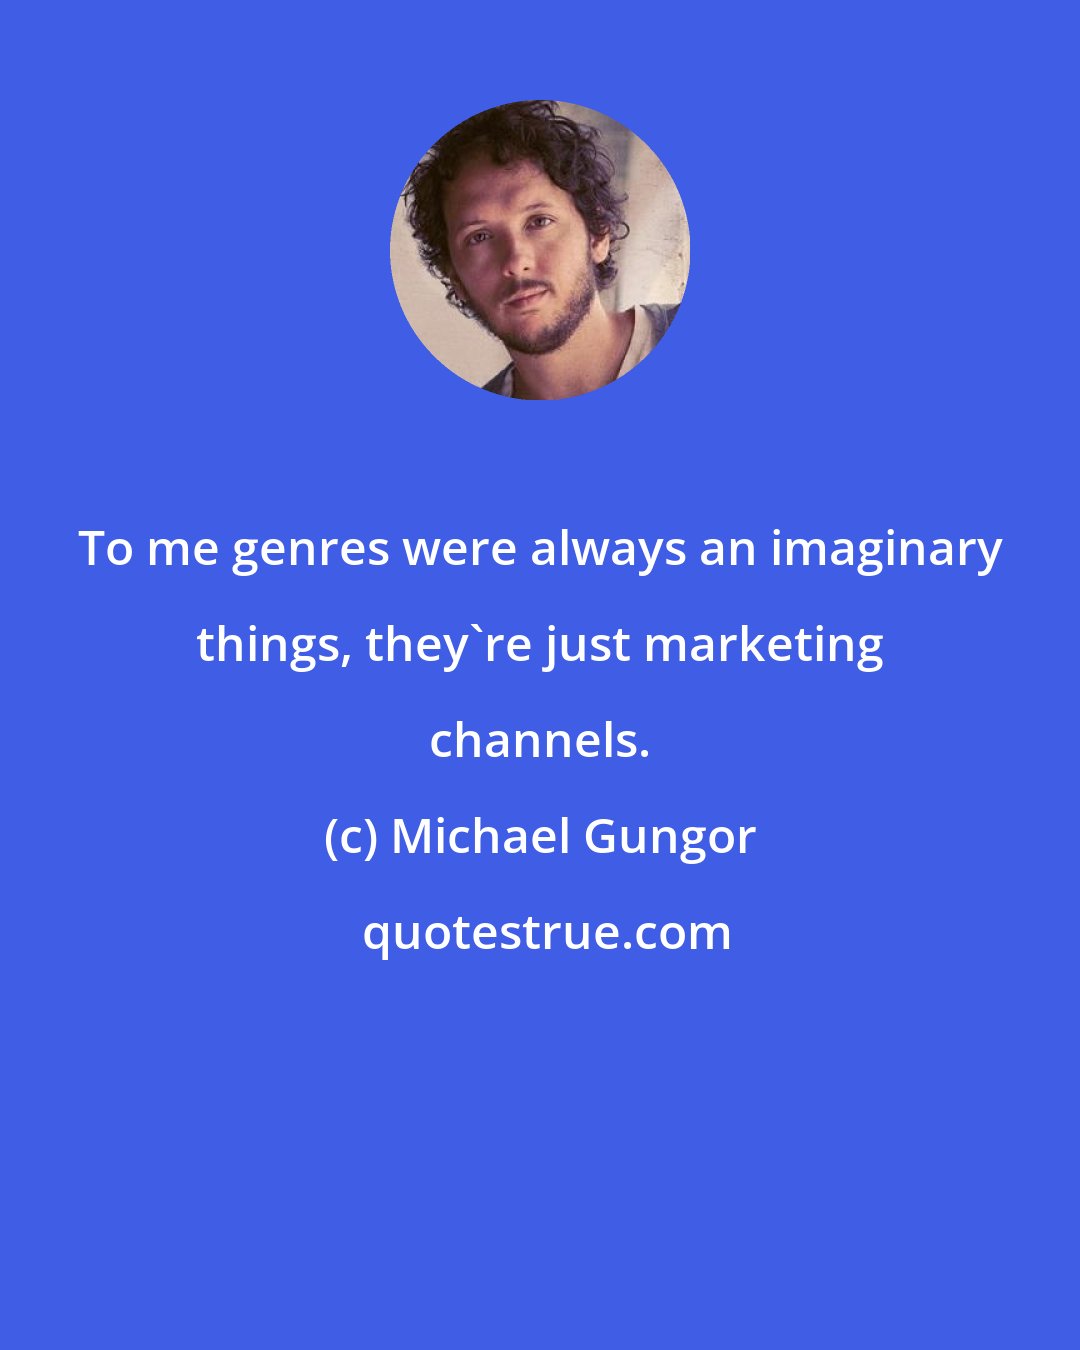 Michael Gungor: To me genres were always an imaginary things, they're just marketing channels.